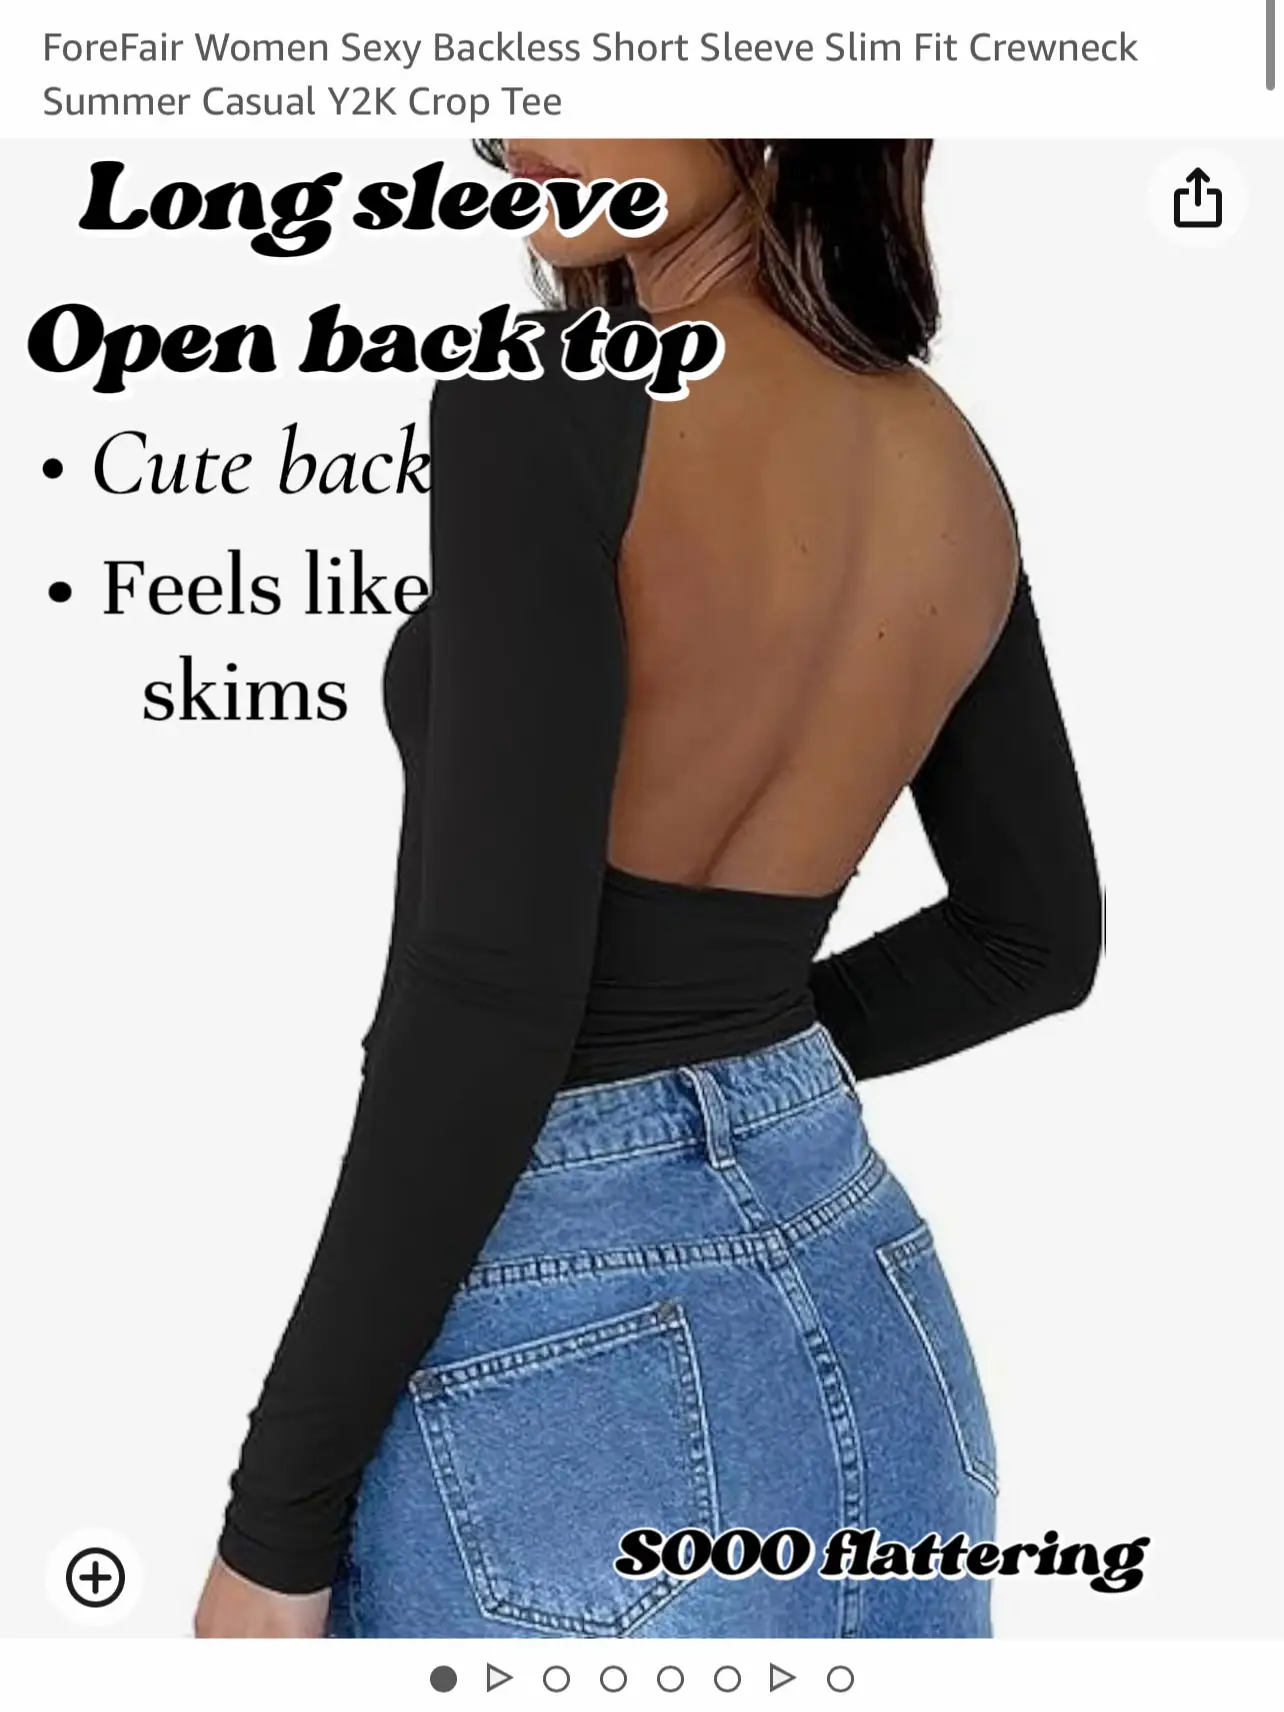  ForeFair Women Sexy Backless Open Back Top Slim Fit